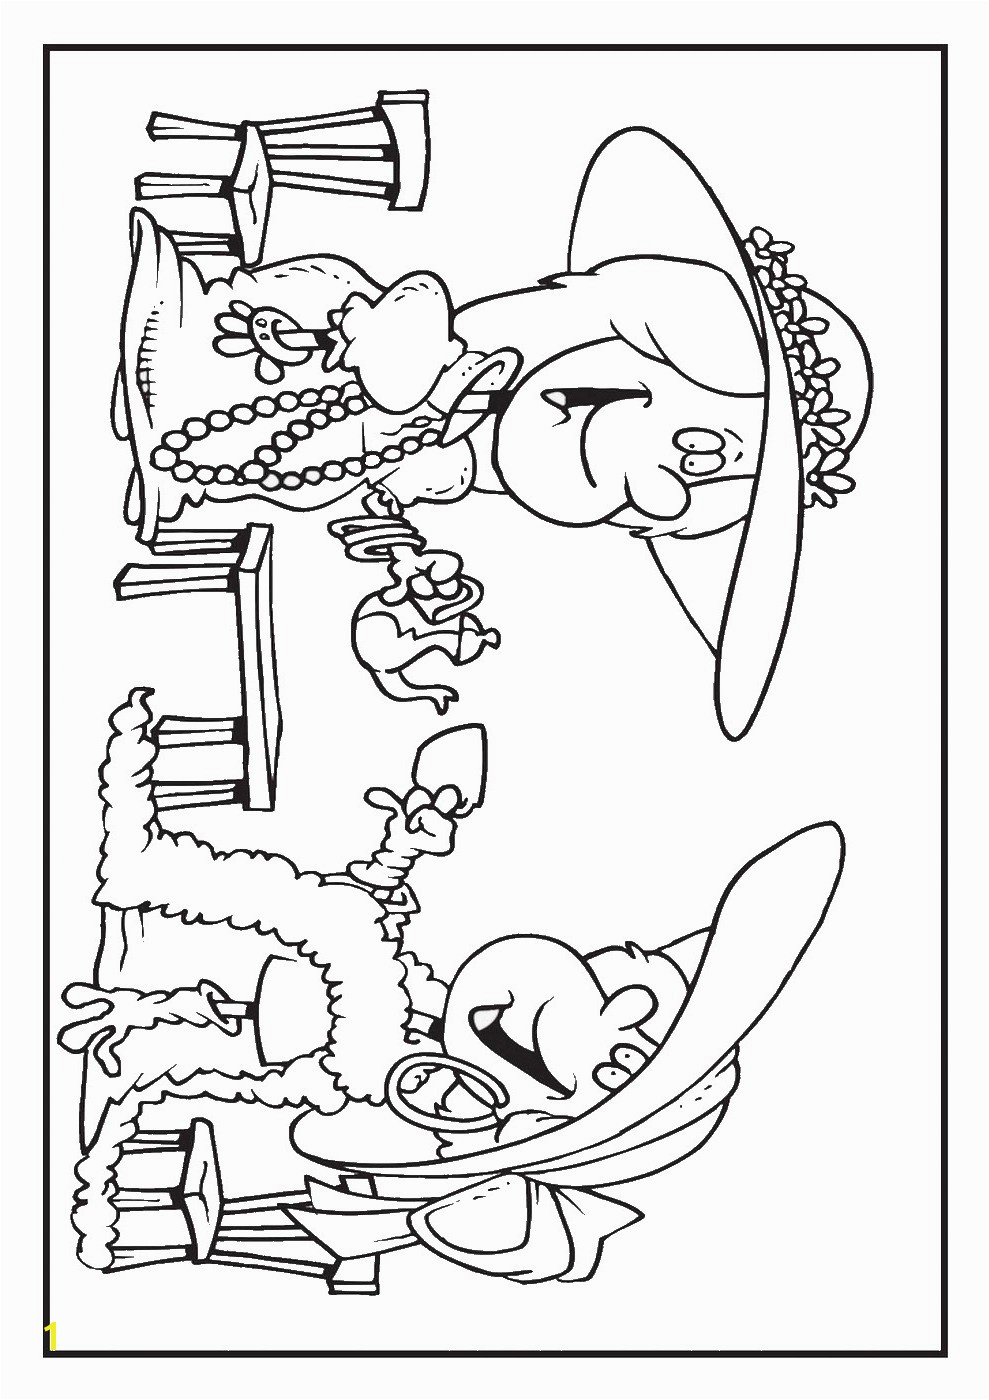 Boston Page Gigantic Free Tea Party Coloring Pages Startling Fresh 9971